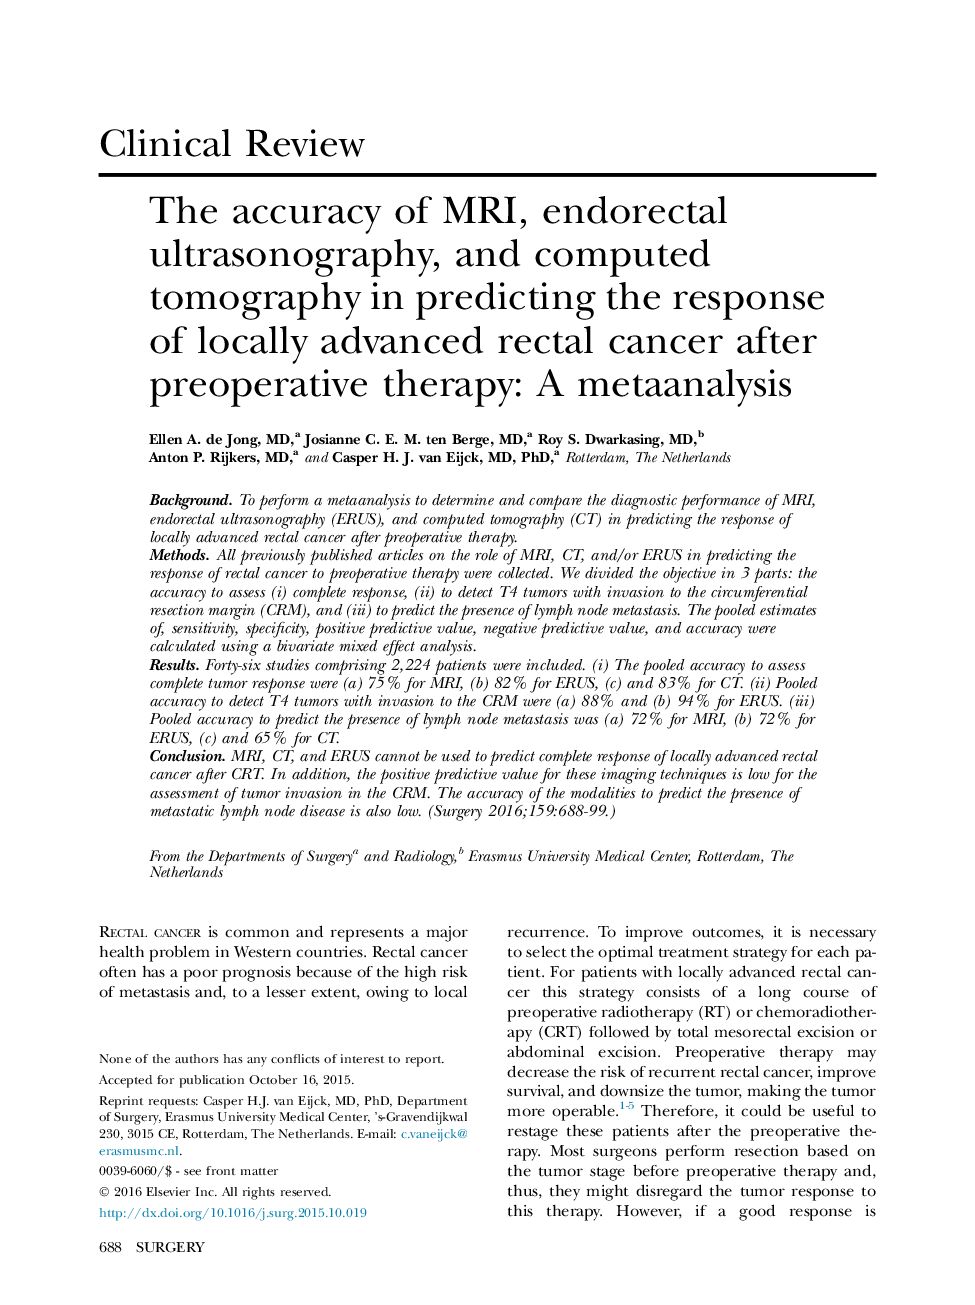 The accuracy of MRI, endorectal ultrasonography, and computed tomography in predicting the response of locally advanced rectal cancer after preoperative therapy: A metaanalysis 